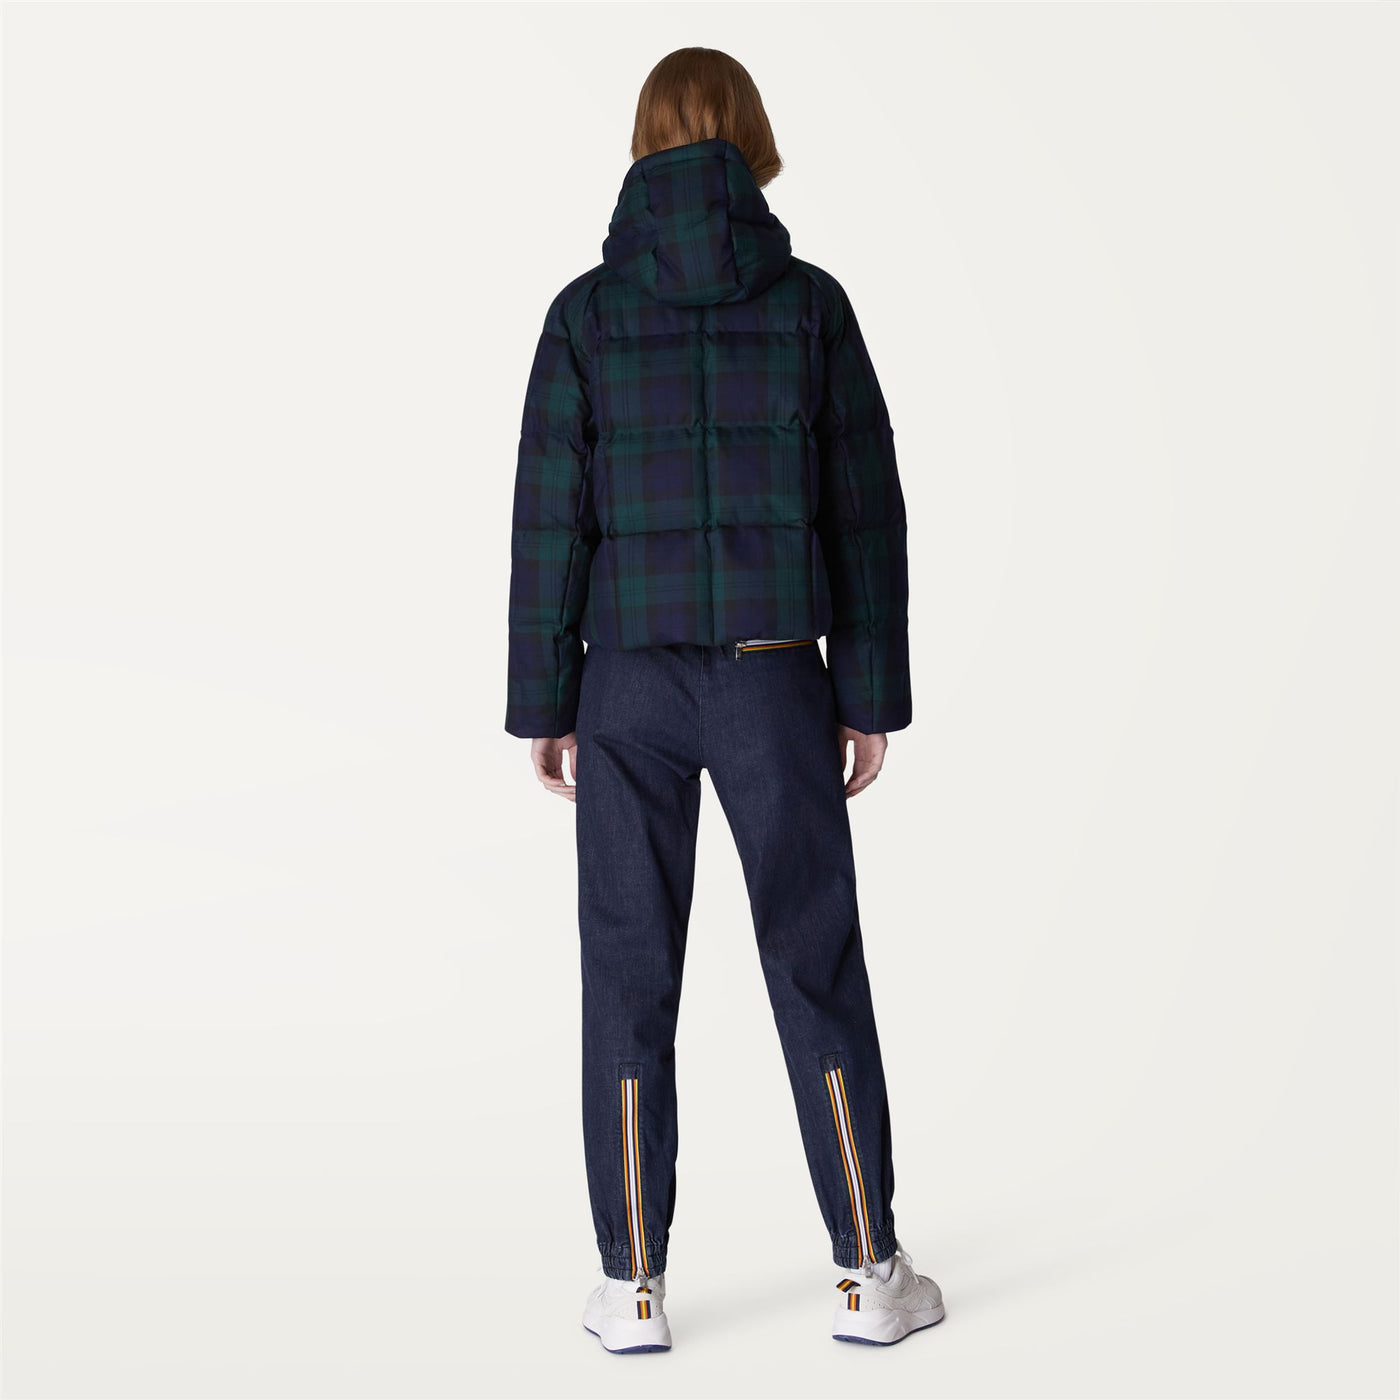 Jackets Woman CARA THERMO WOOL Short TARTAN BLUE GREEN Dressed Front Double		